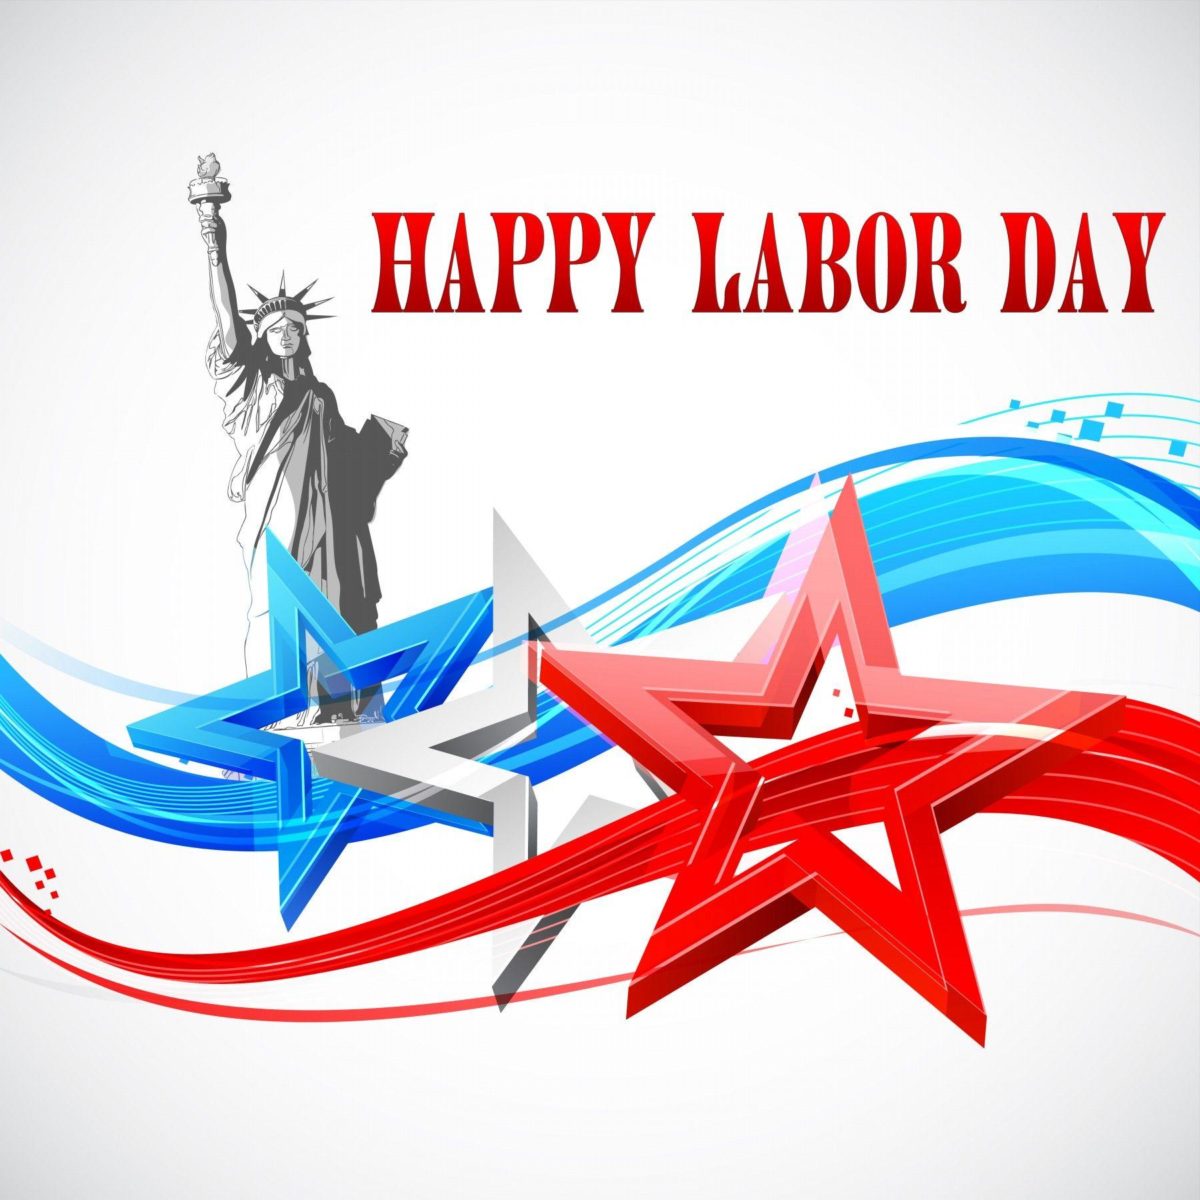 Labor Day USA Wallpapers, Images, Pics, Greetings 2014 …